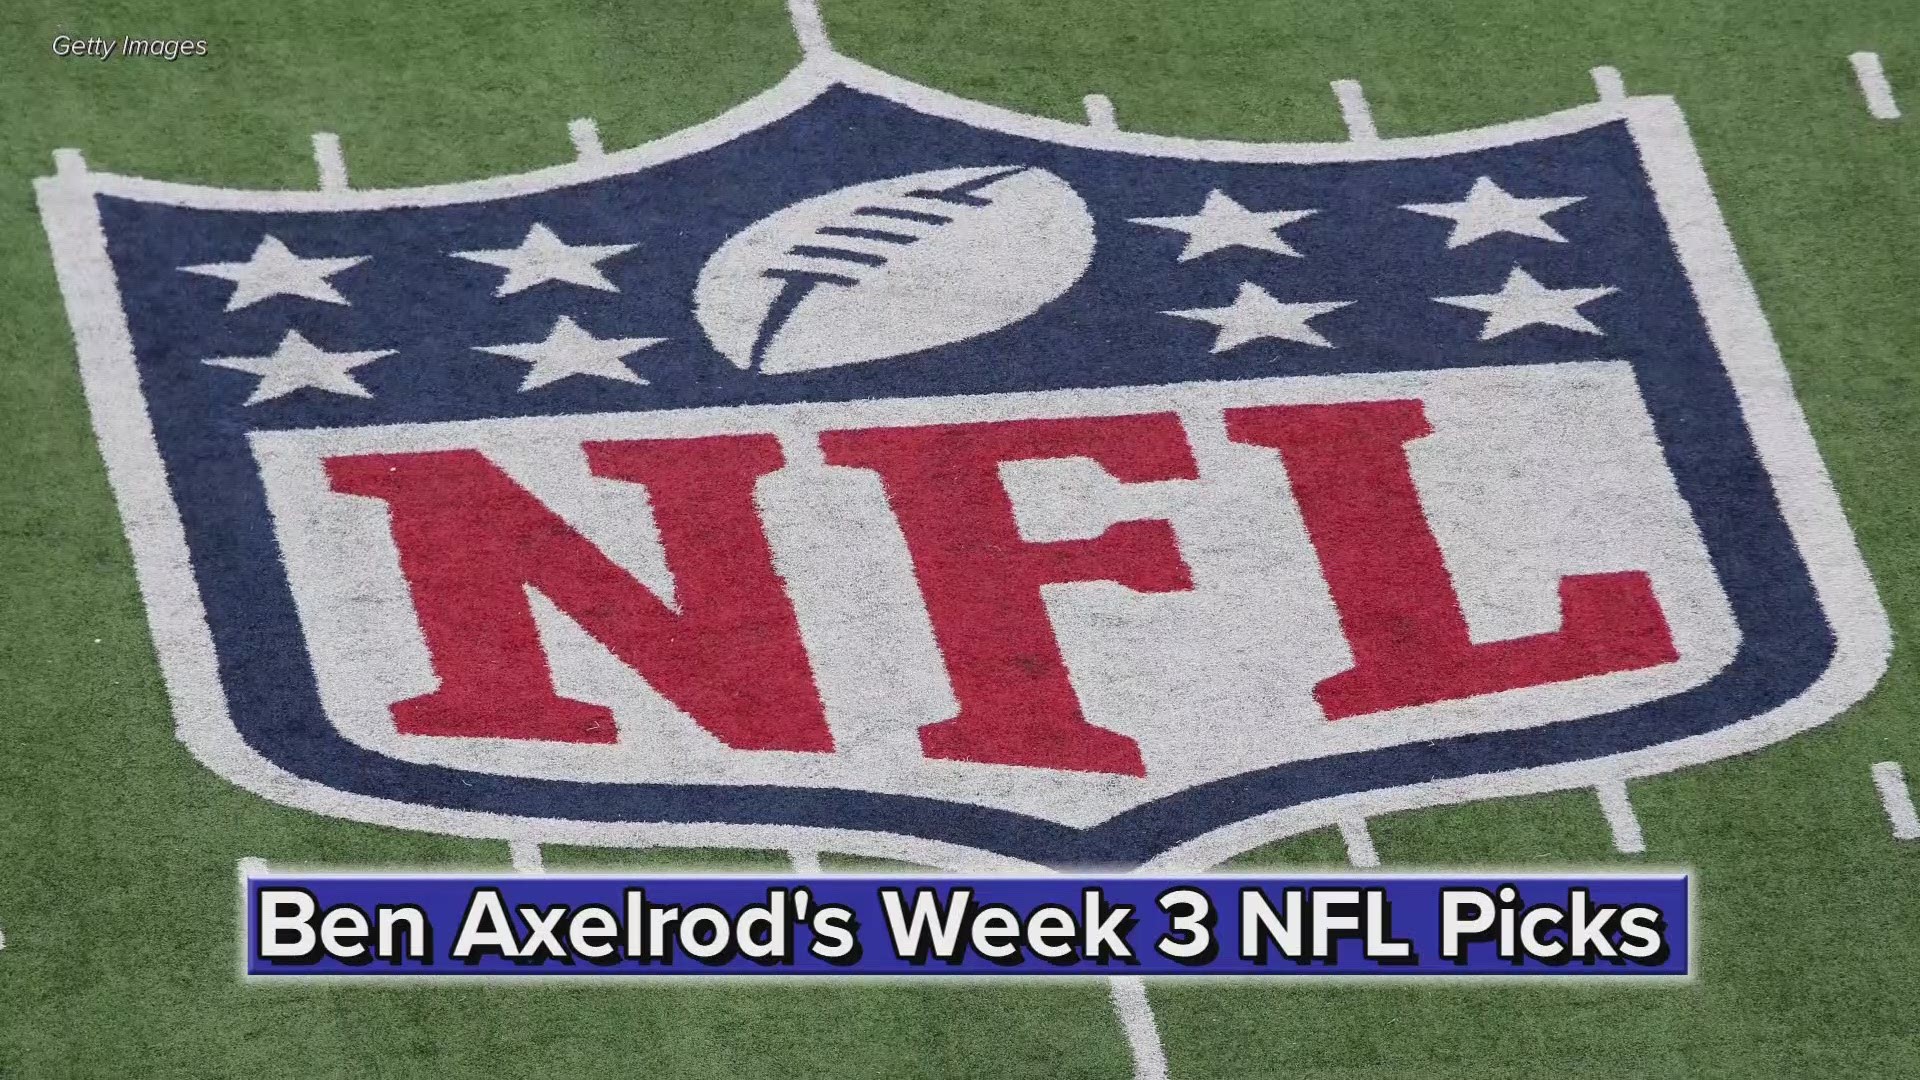 Ben Axelrod's Week 3 NFL Picks: Browns get their first win, Chargers cover in battle of Los Angeles